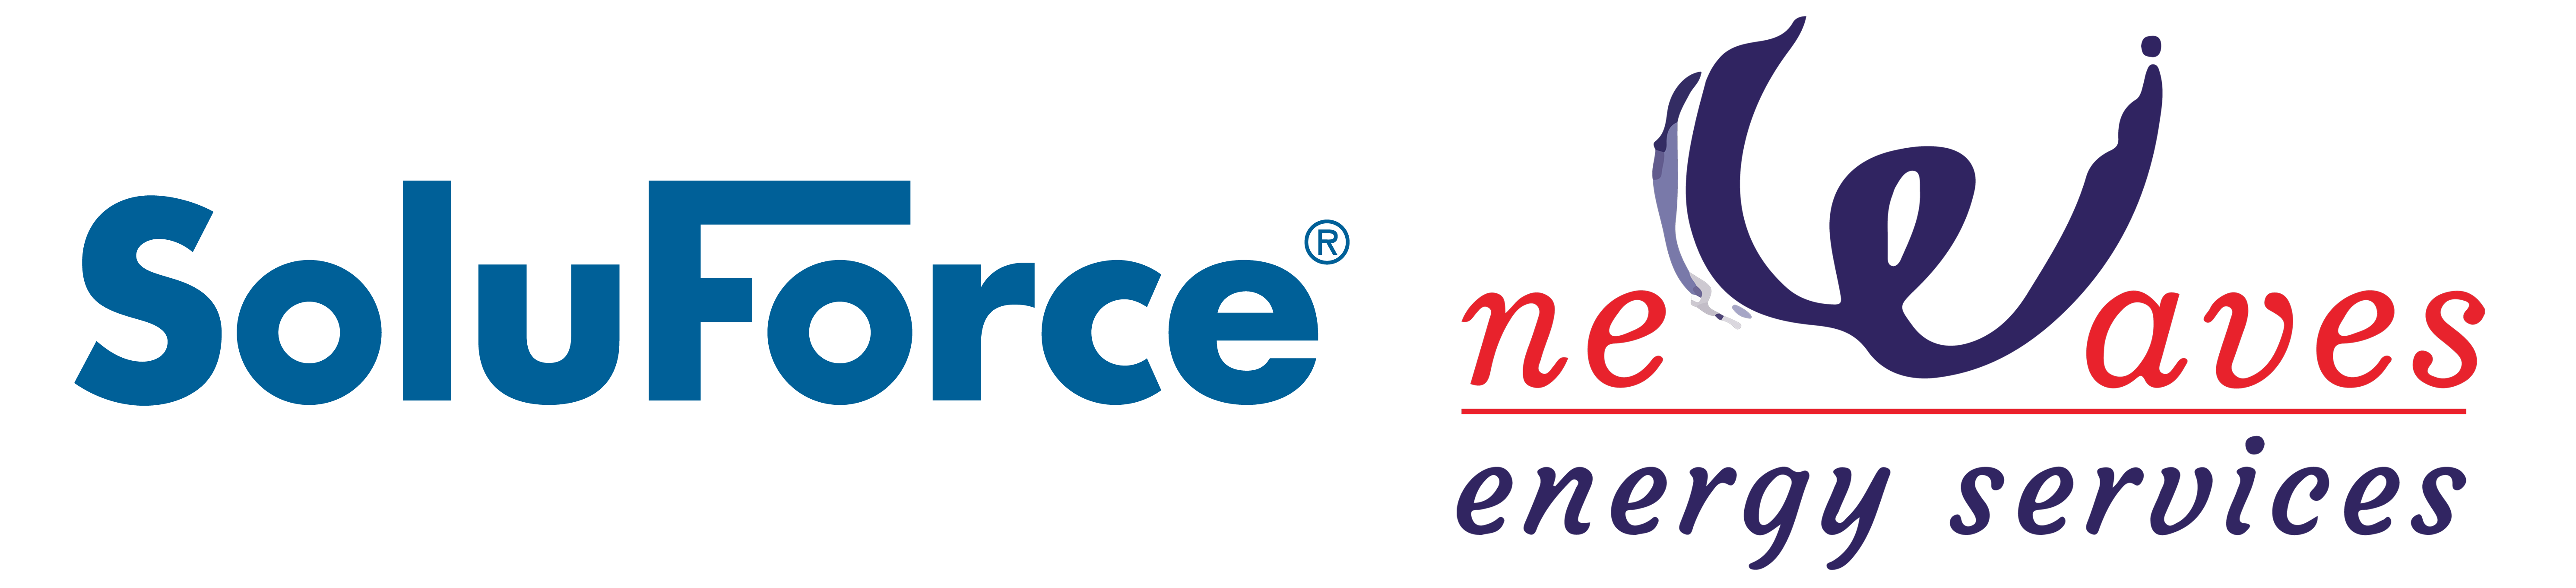 4-	SoluForce / New Waves Energy Services